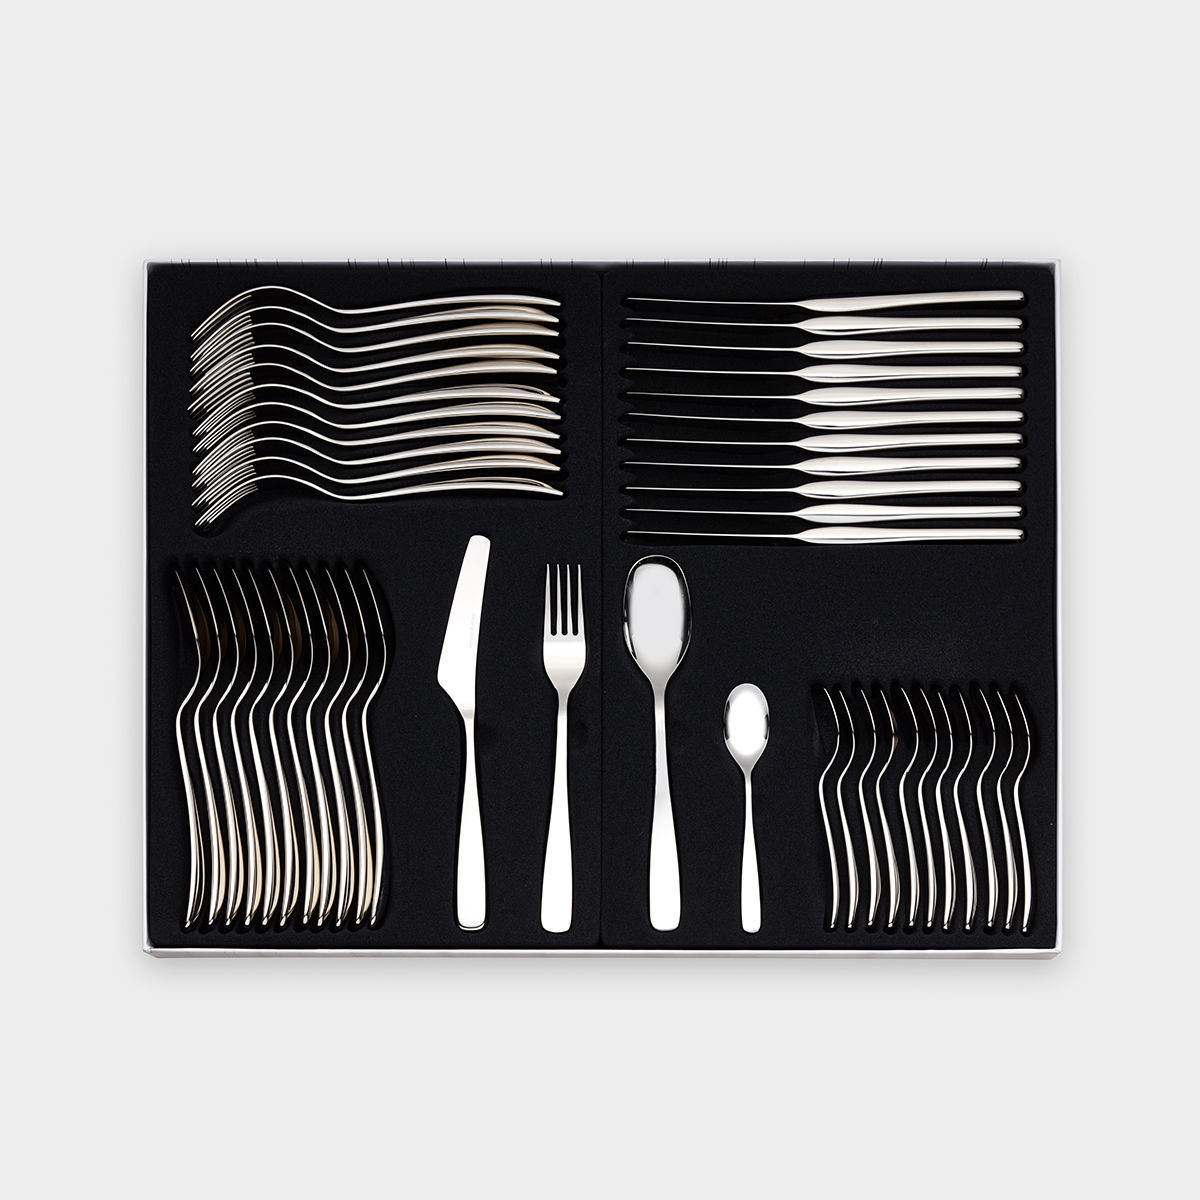 Tuva cutlery set 48 pieces product image